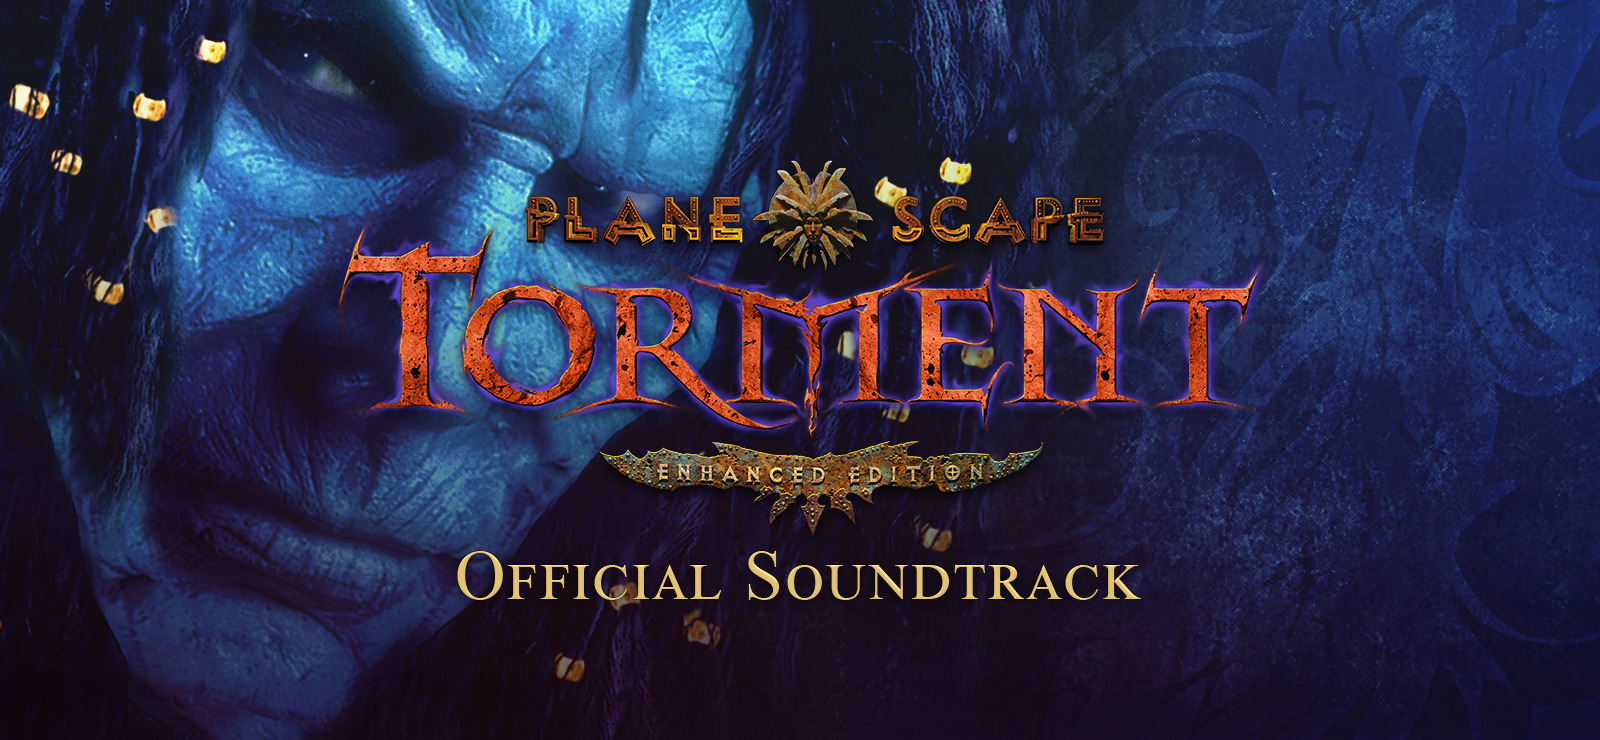 Planescape: Torment: on Edition Enhanced Soundtrack Official